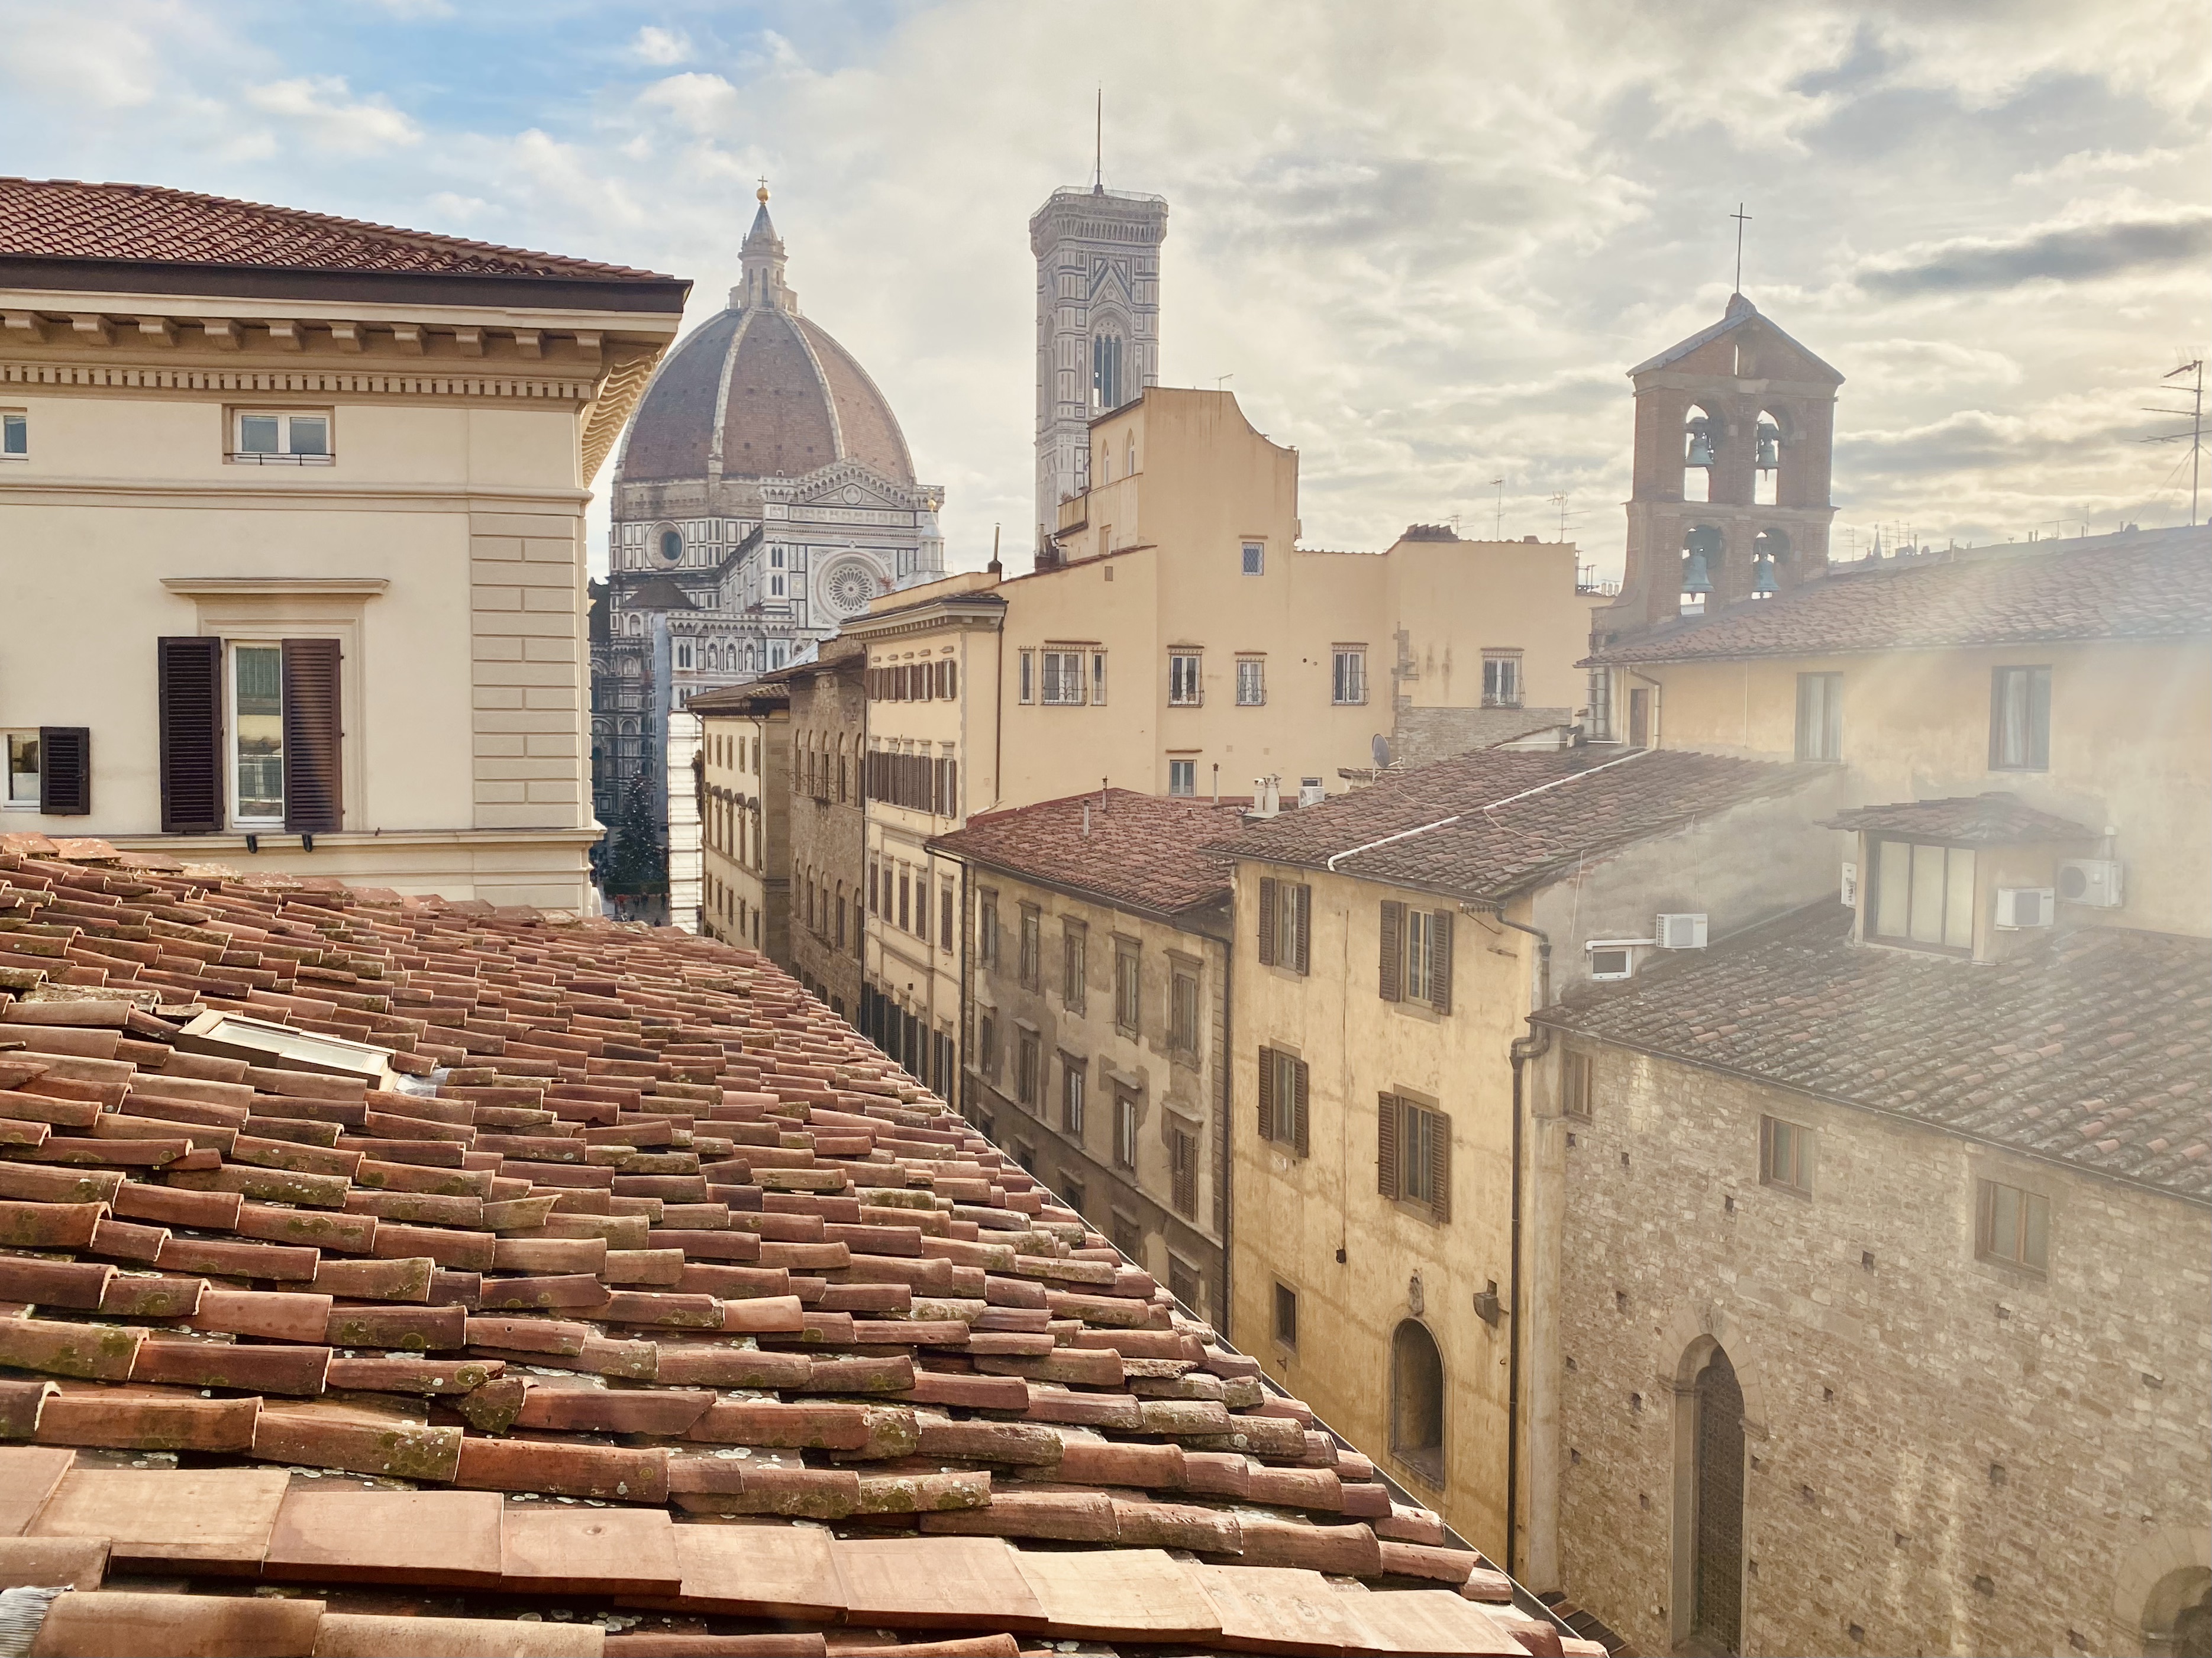 Fostering innovation at work: fresh takeaways inspired from the Italian Renaissance